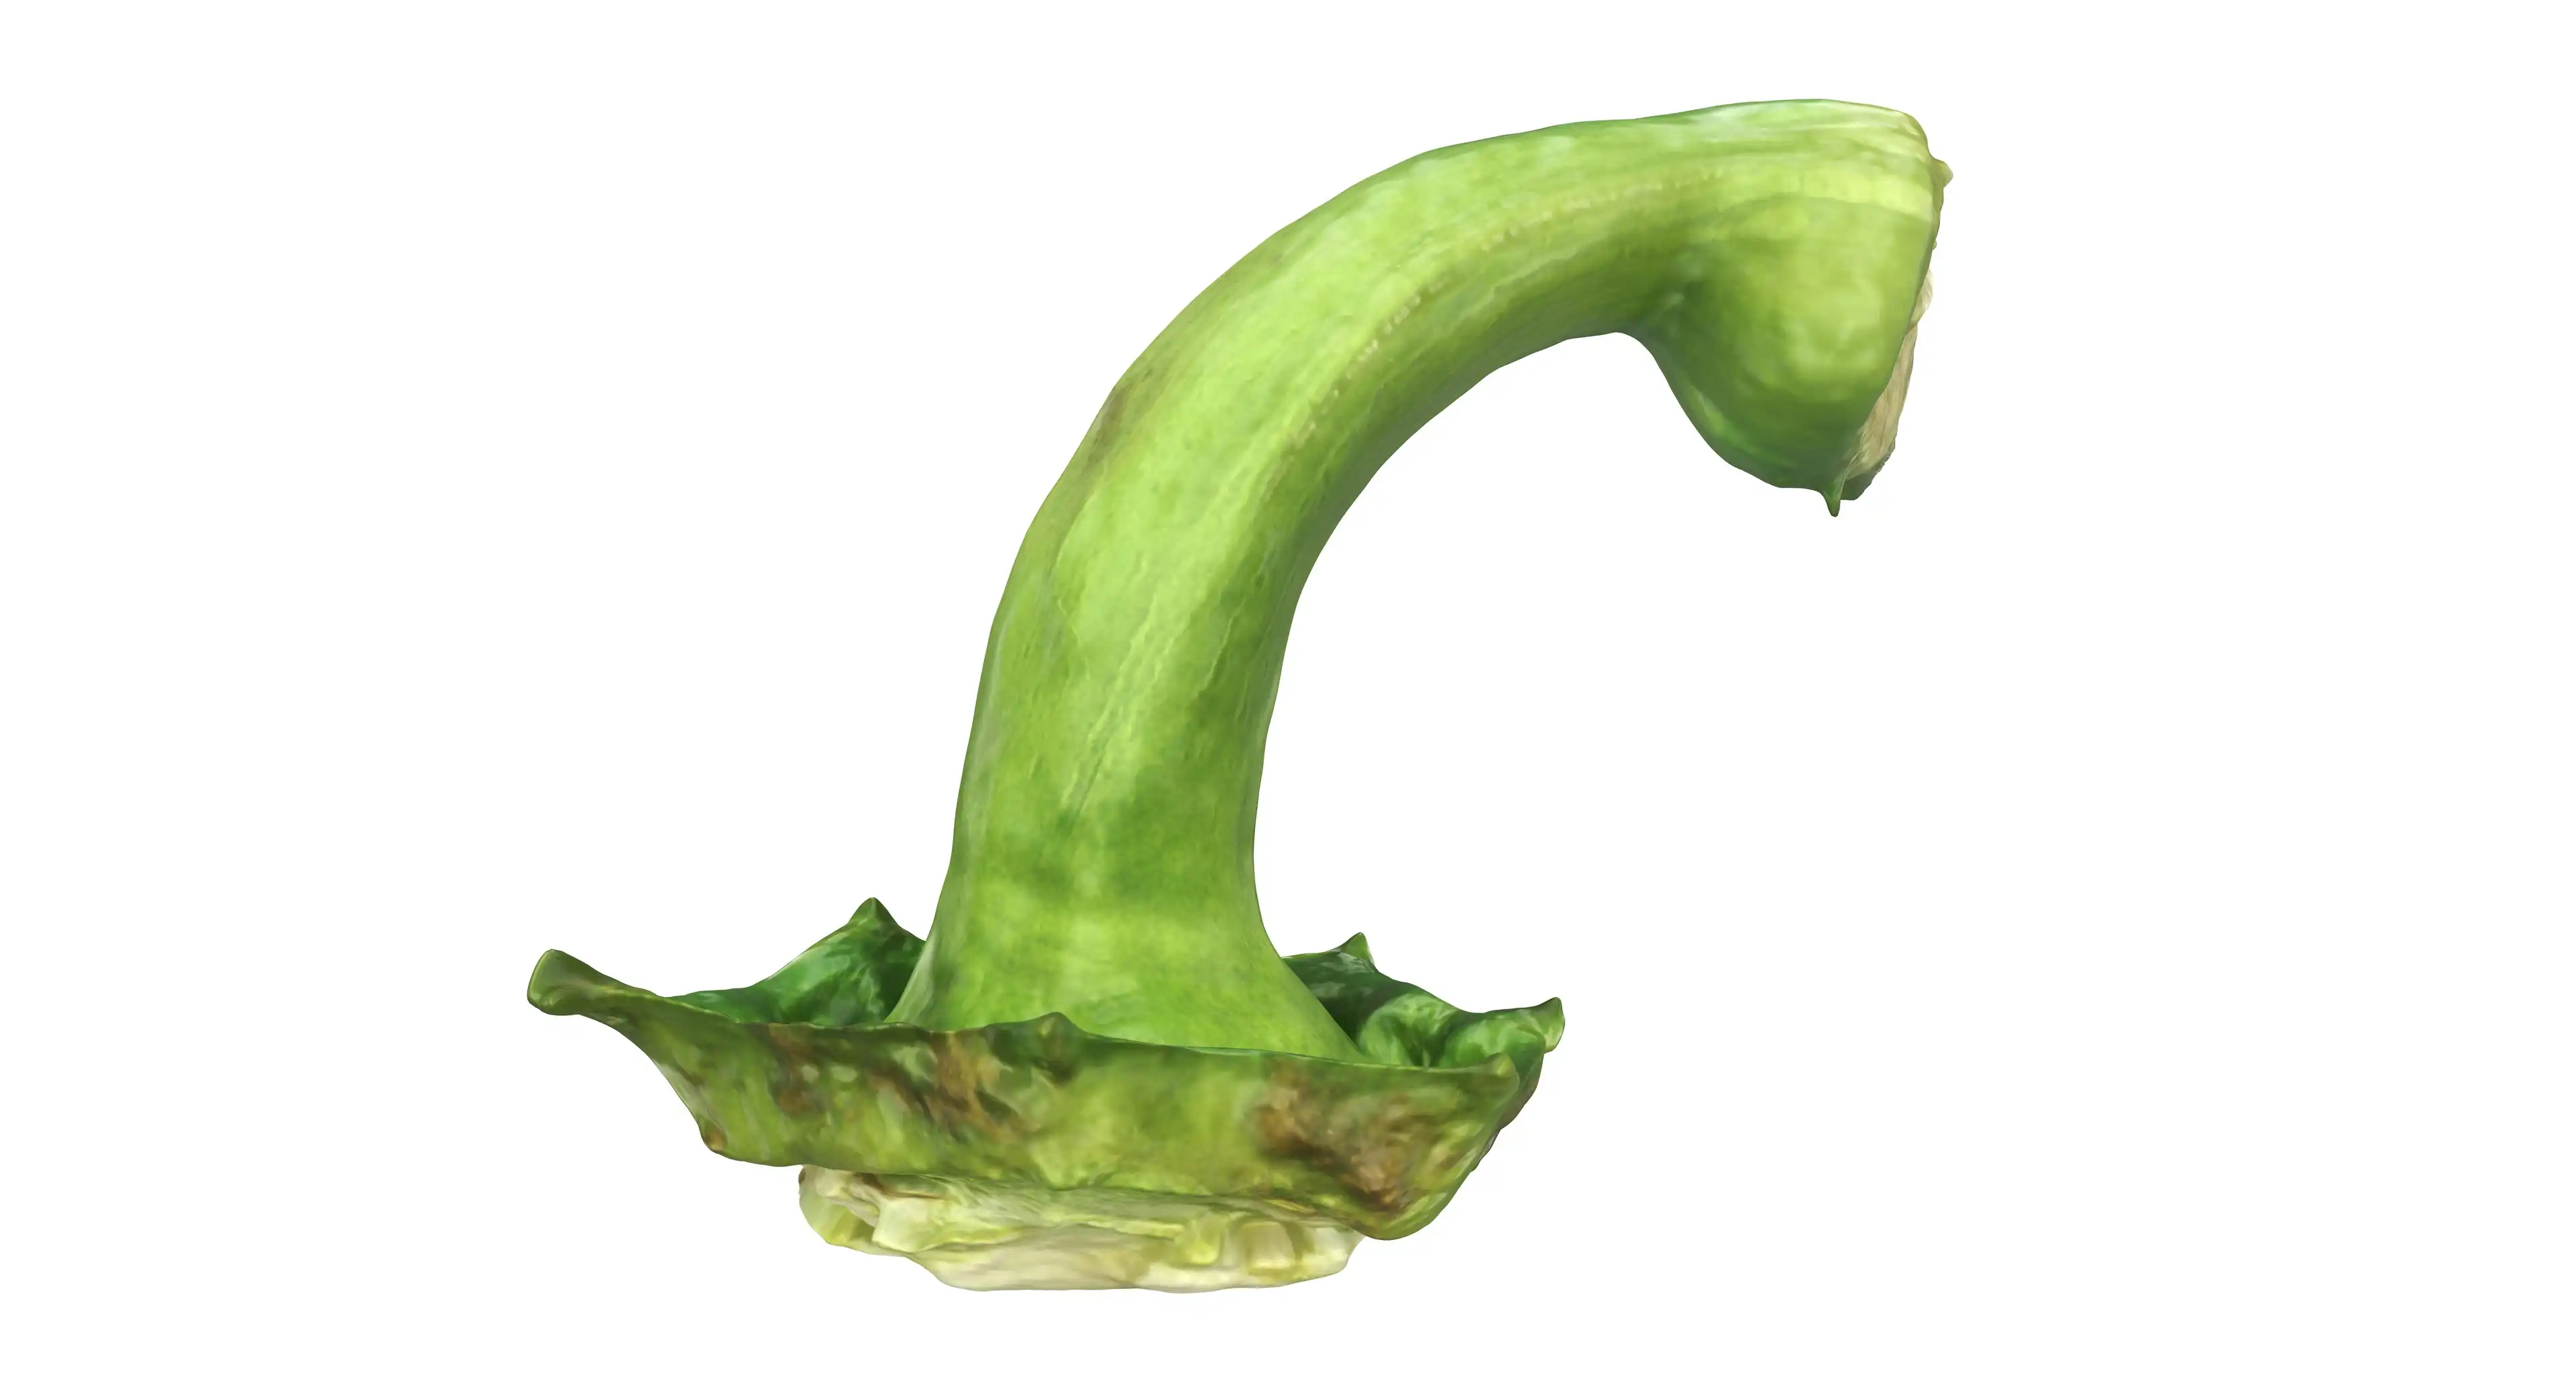 3D rendering of an isolated scanned green trunk of a bell pepper.